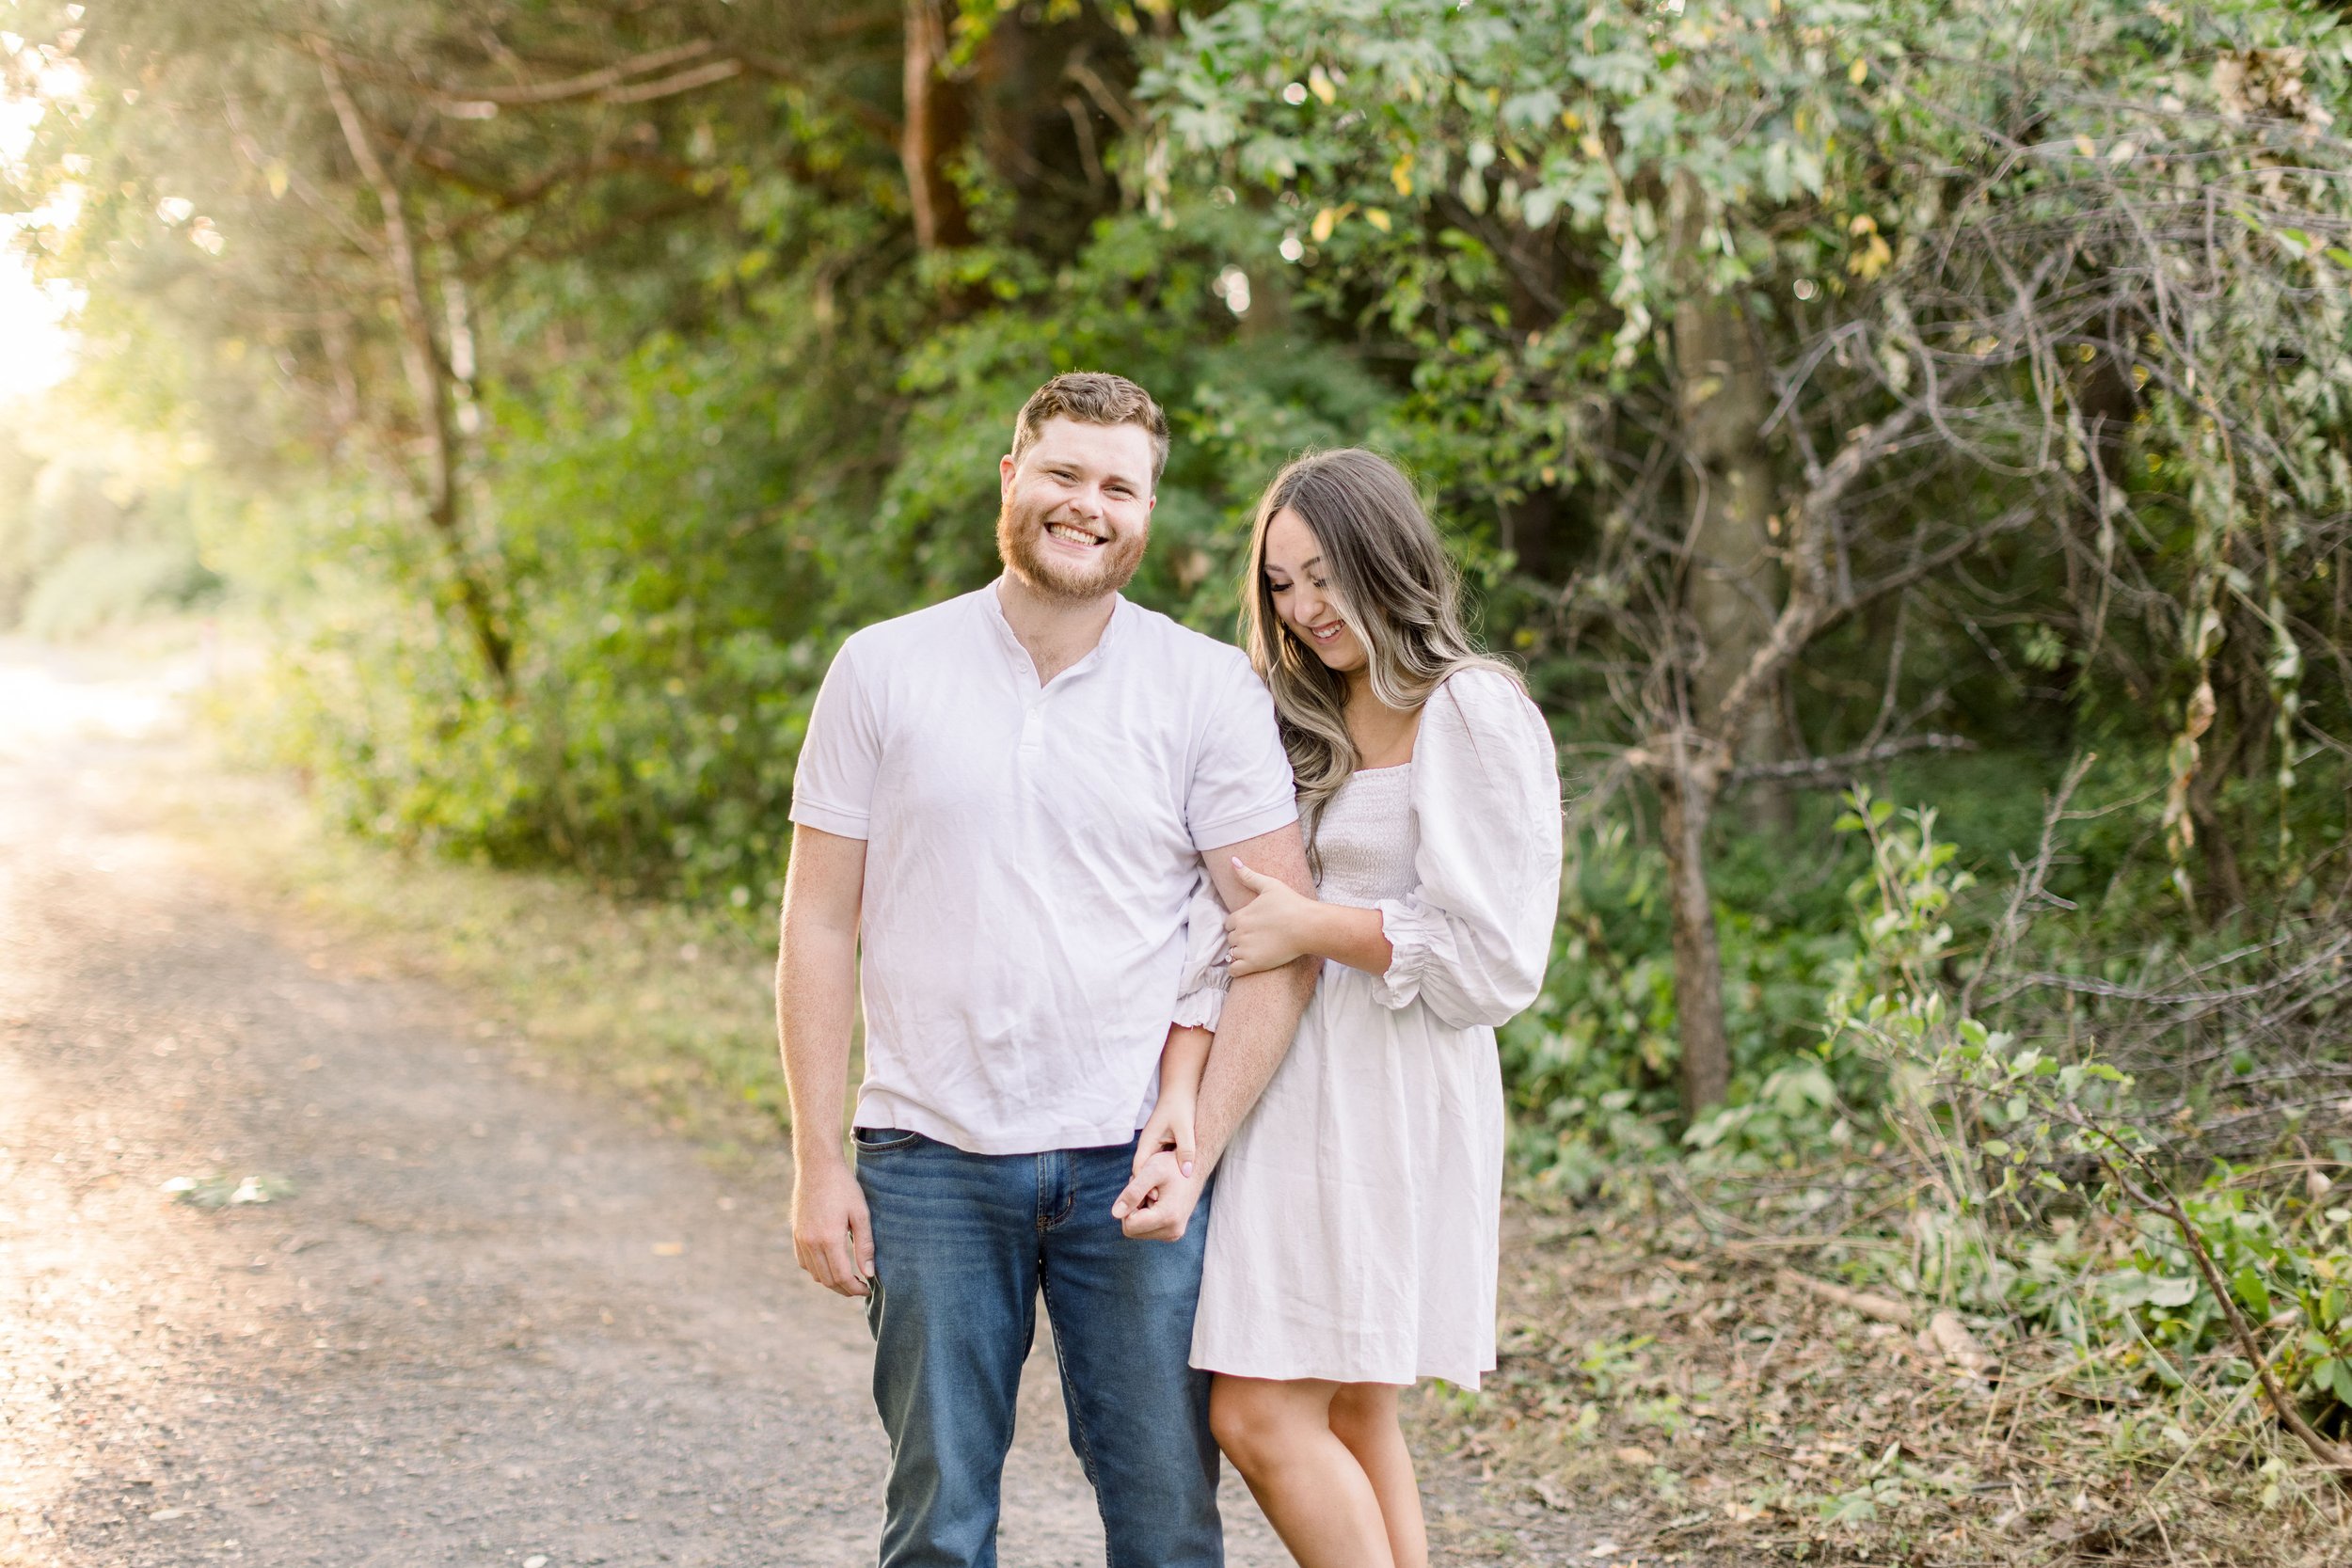  At the Ottawa Arboretum in golden sunlight, an engaged couple smiles for a portrait by Chelsea Mason Photography. outdoor #ChelseaMasonPhotography #ChelseaMasonEngagements #Ottawaphotographers #ArboretumOttawaEngagments #weddingannouncementportraits